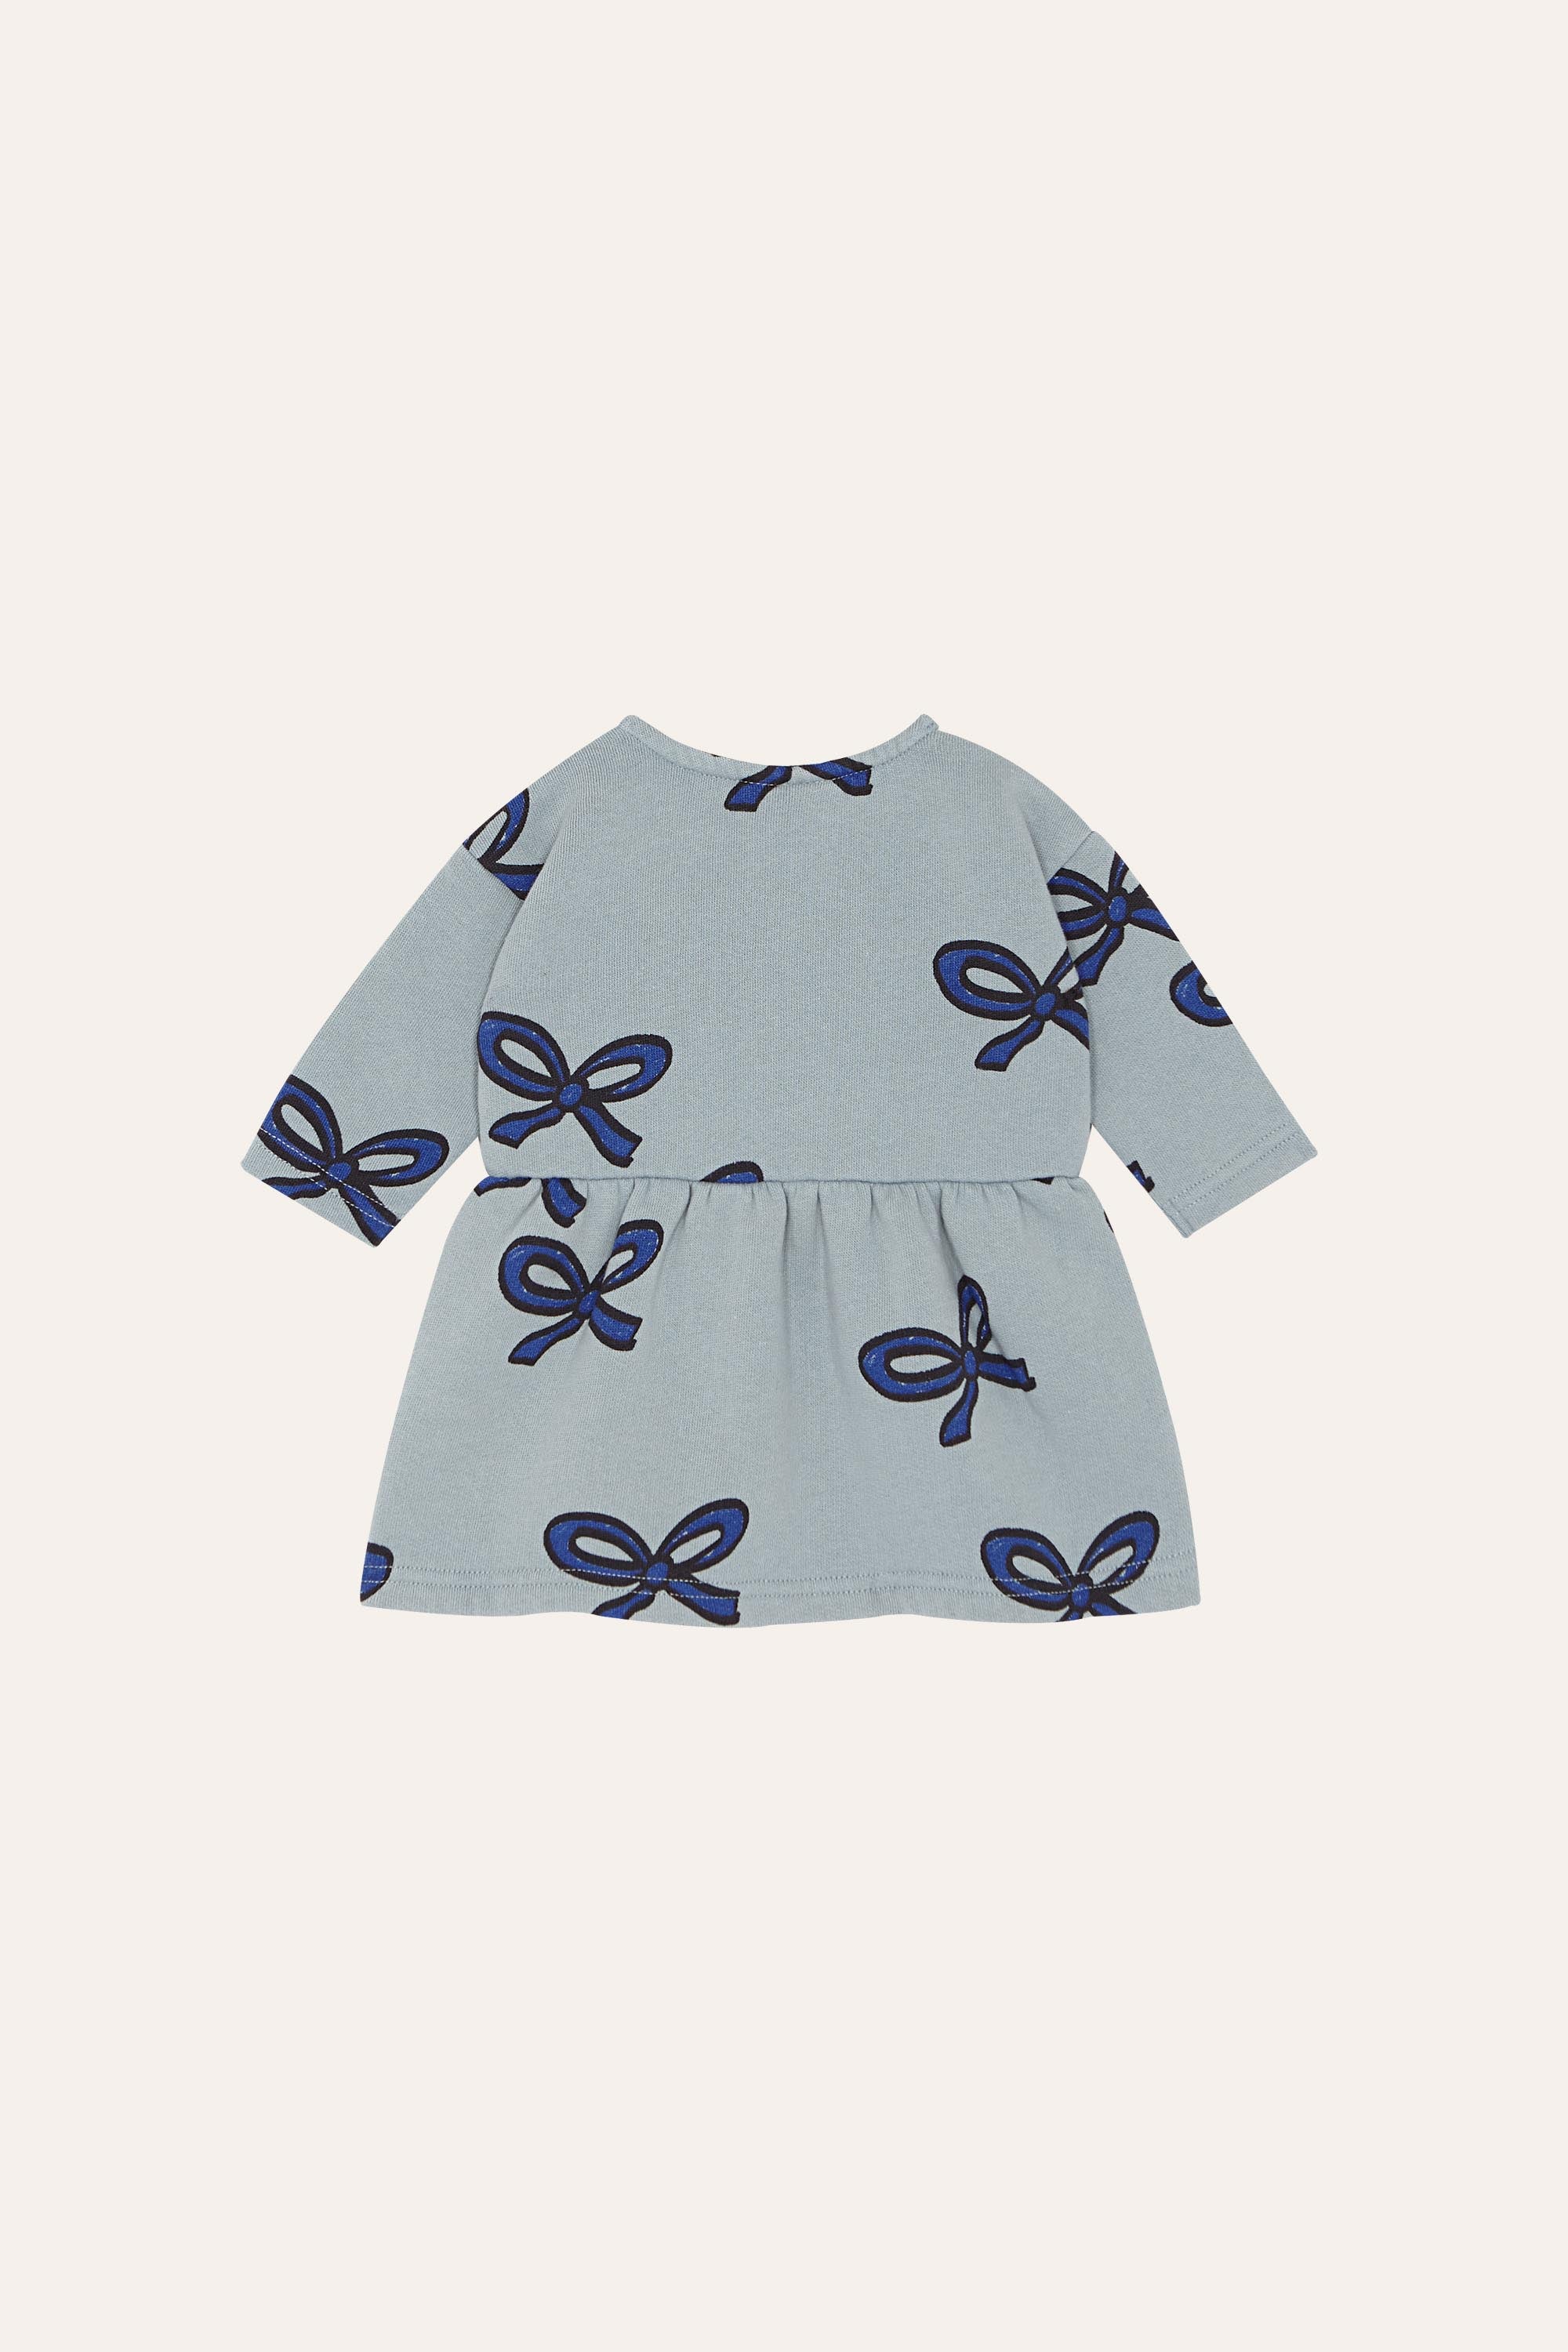 The Campamento Bows Baby Dress